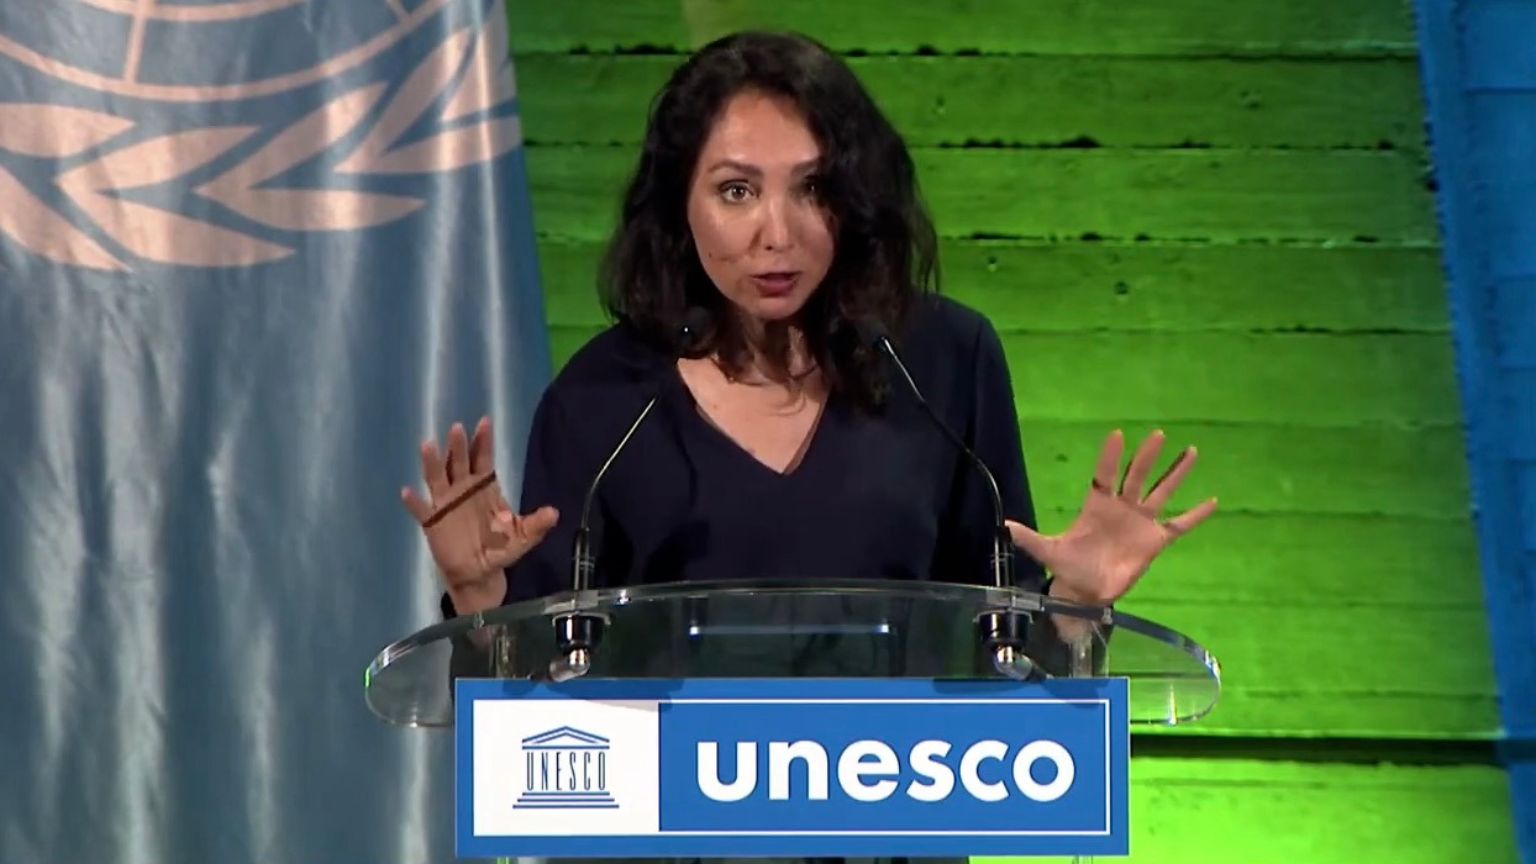 UN says that censoring “disinformation” and “hate speech” will protect “free speech”